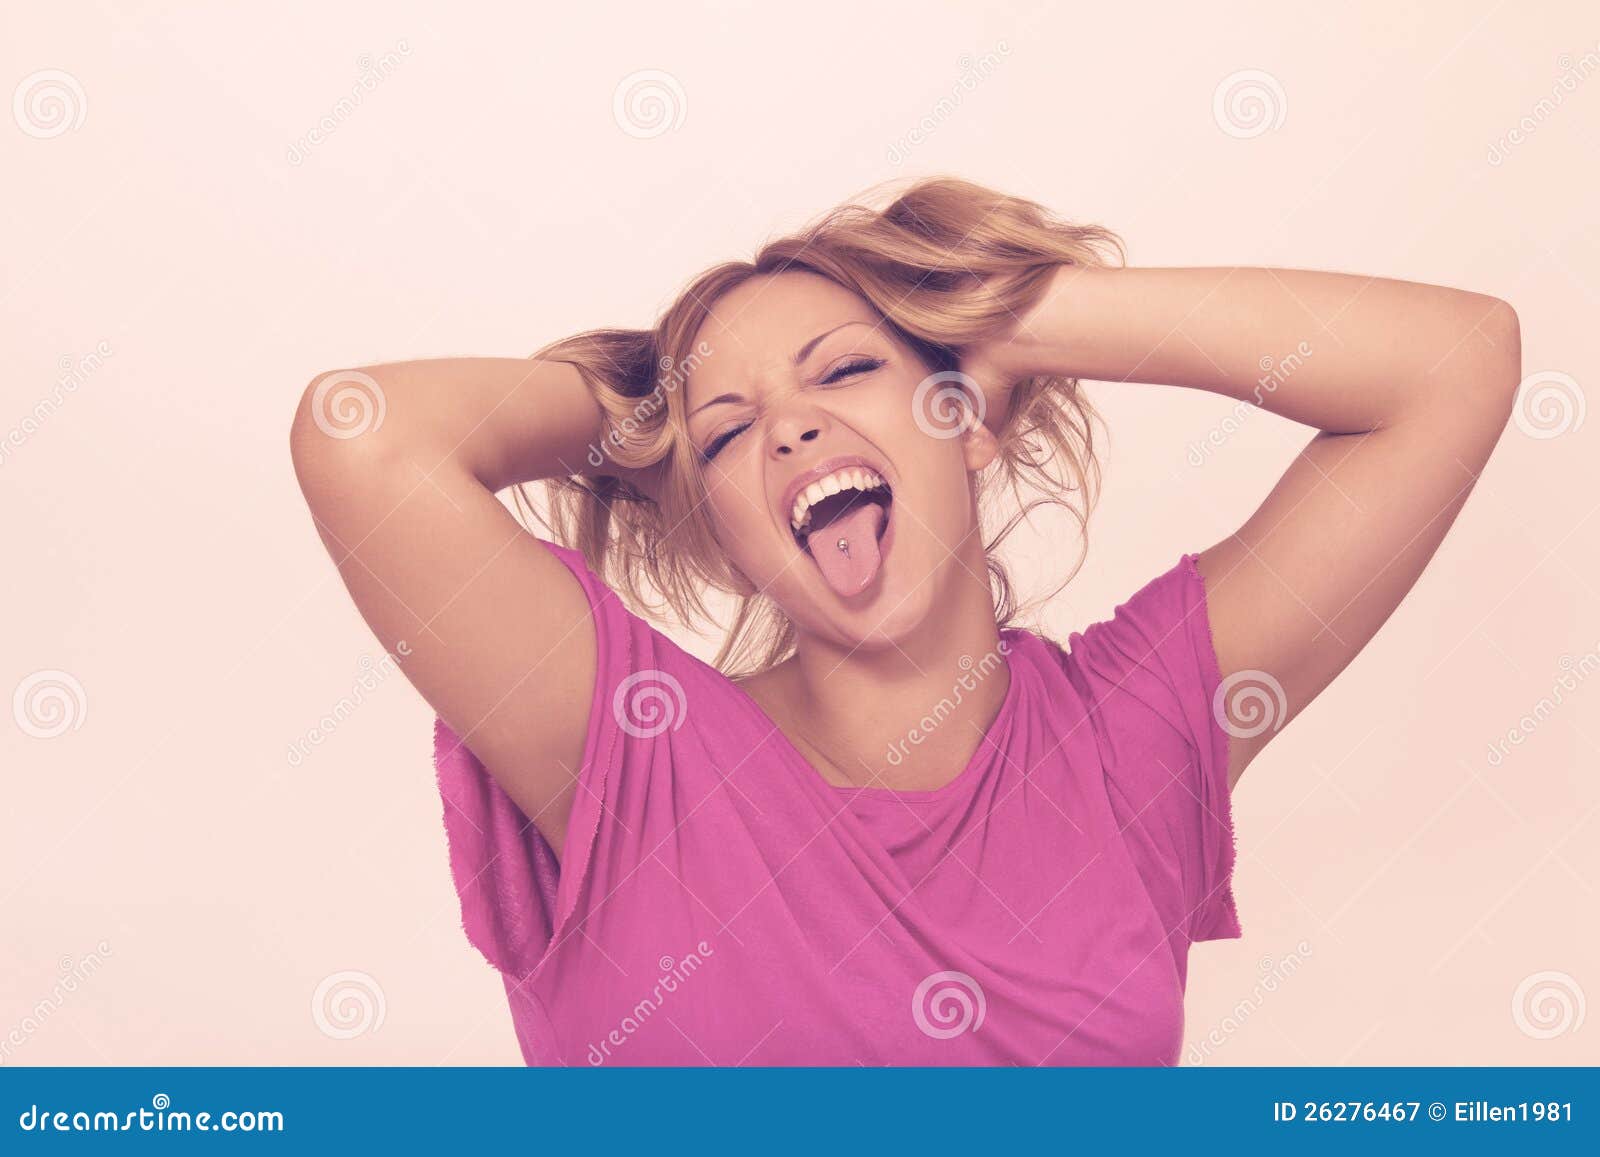 Royalty Free Stock Photography: Young woman making funny faces